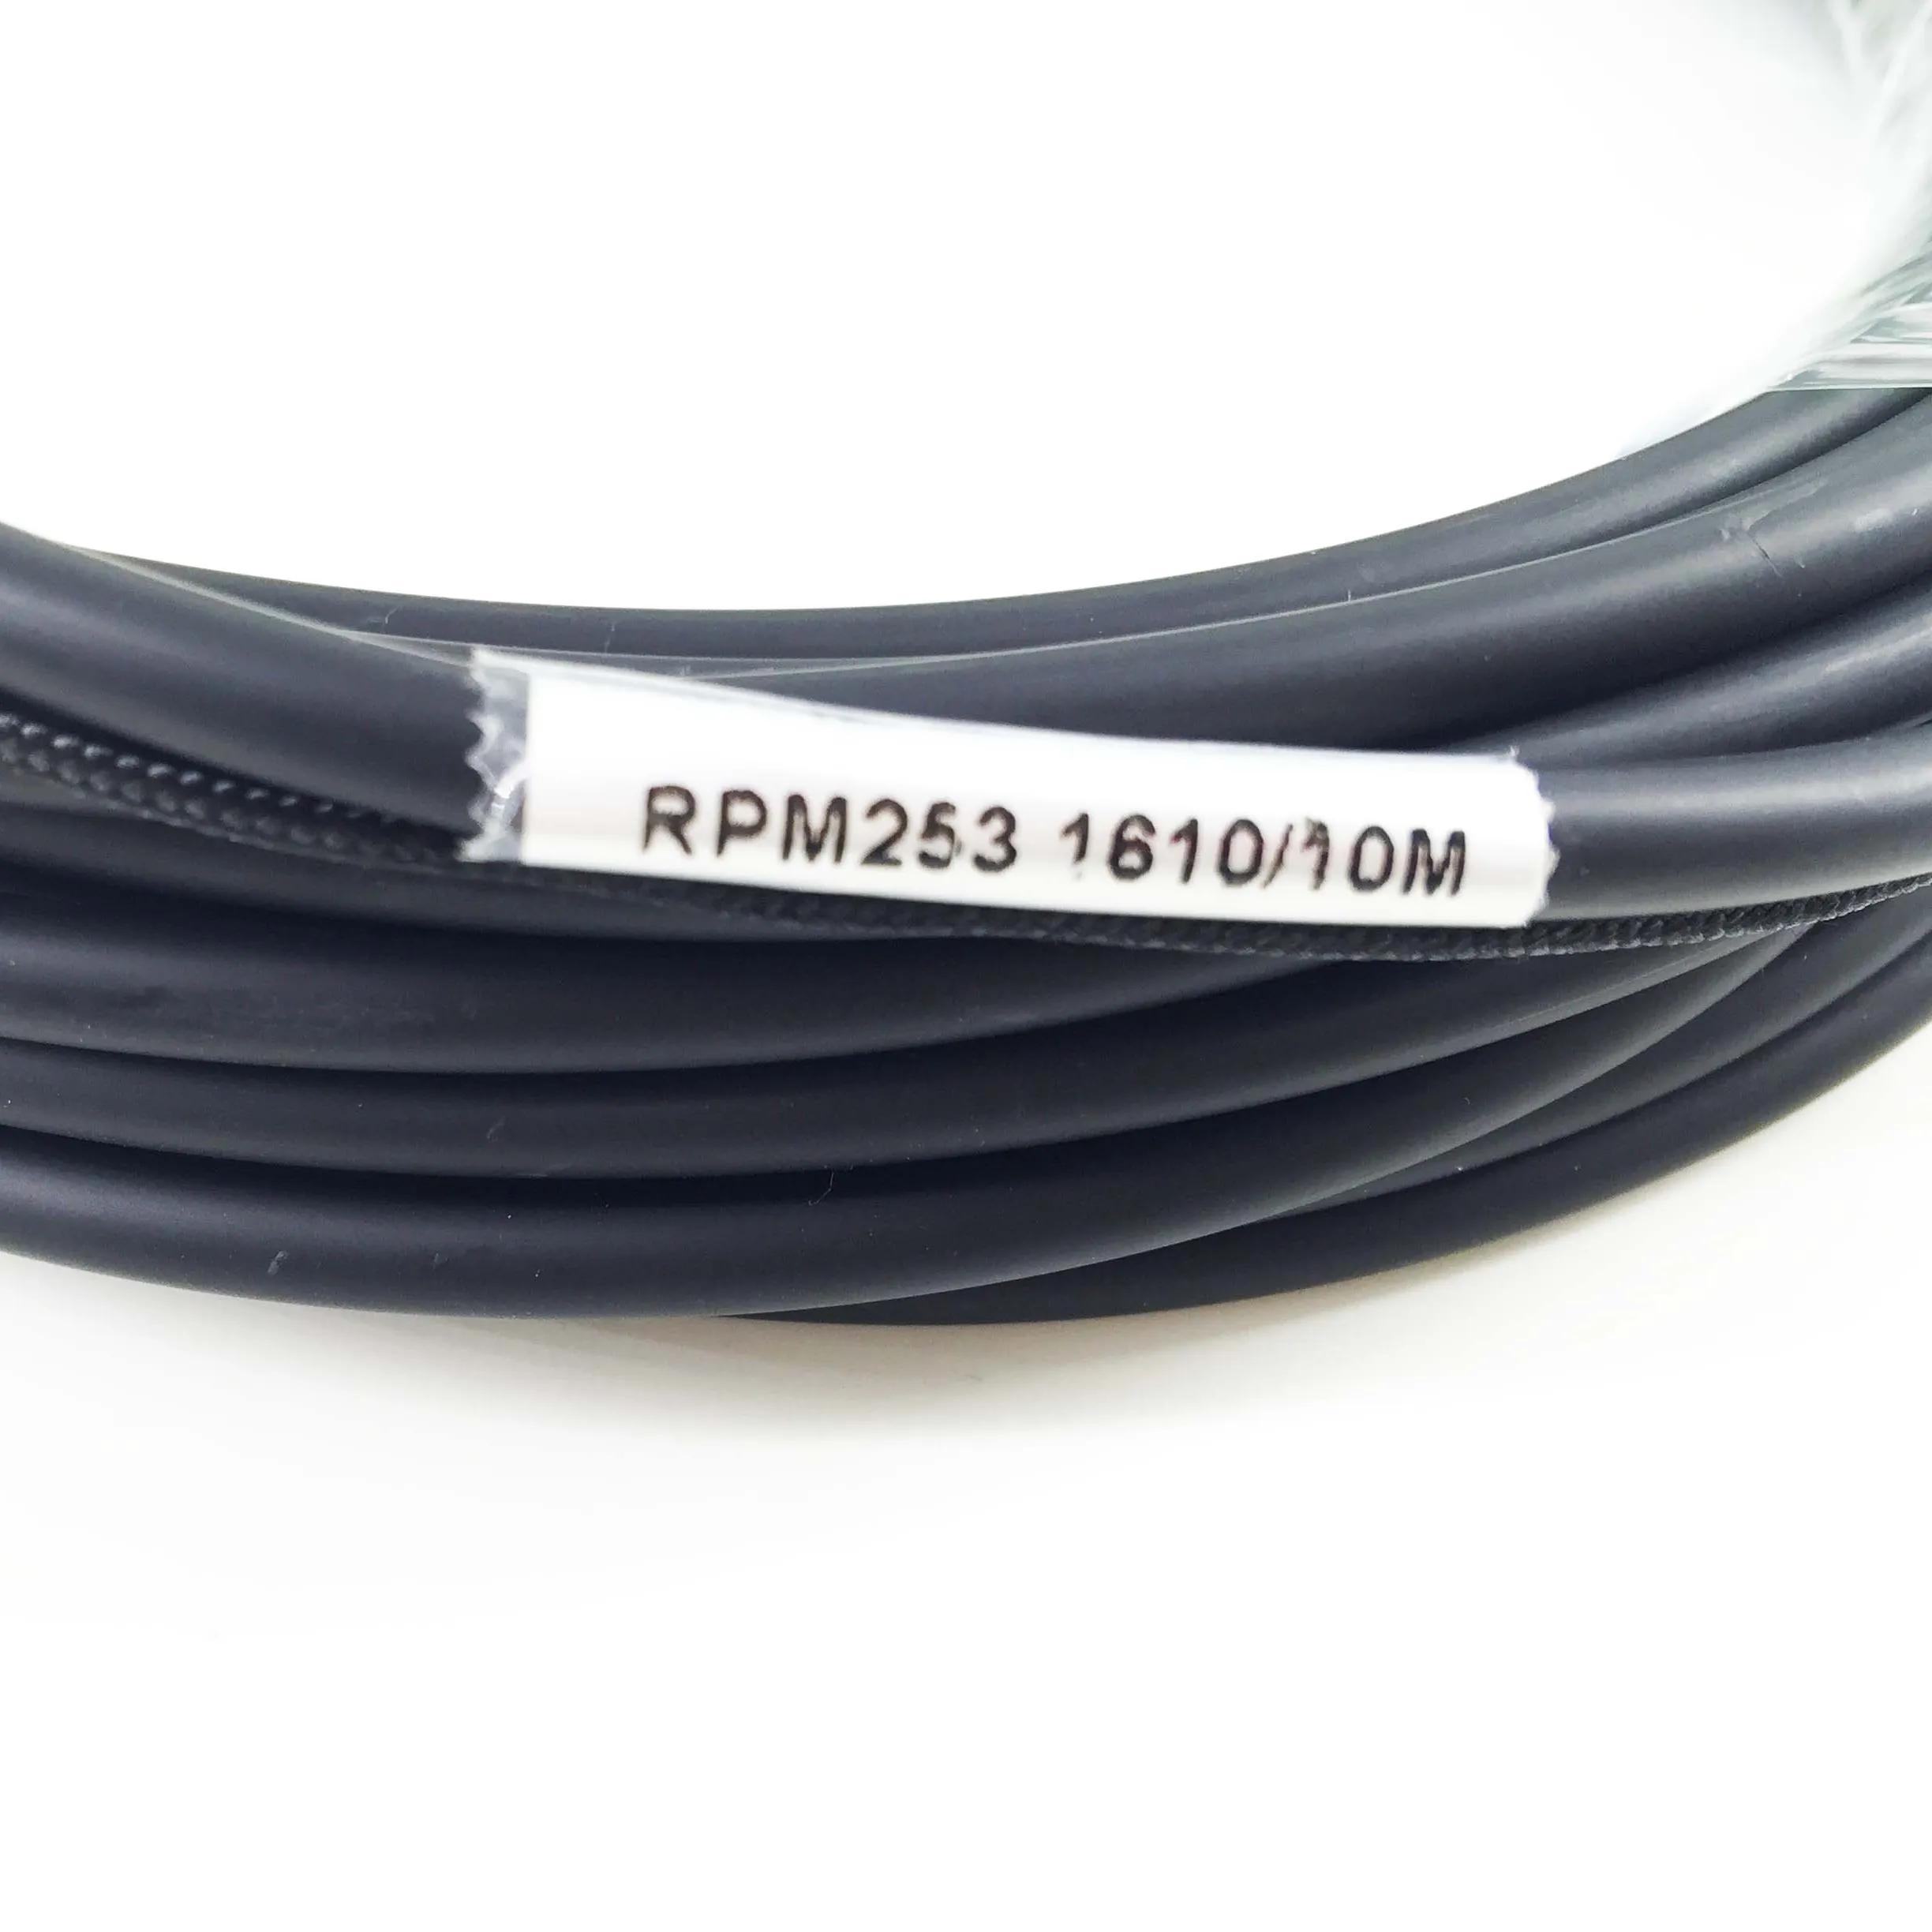 RPM253 1619/50M Fiber Optic Cable- 50 Meter, Singlemode 2 Fiber (G657A), Indoor/Outdoor Rated with FLX TO LC